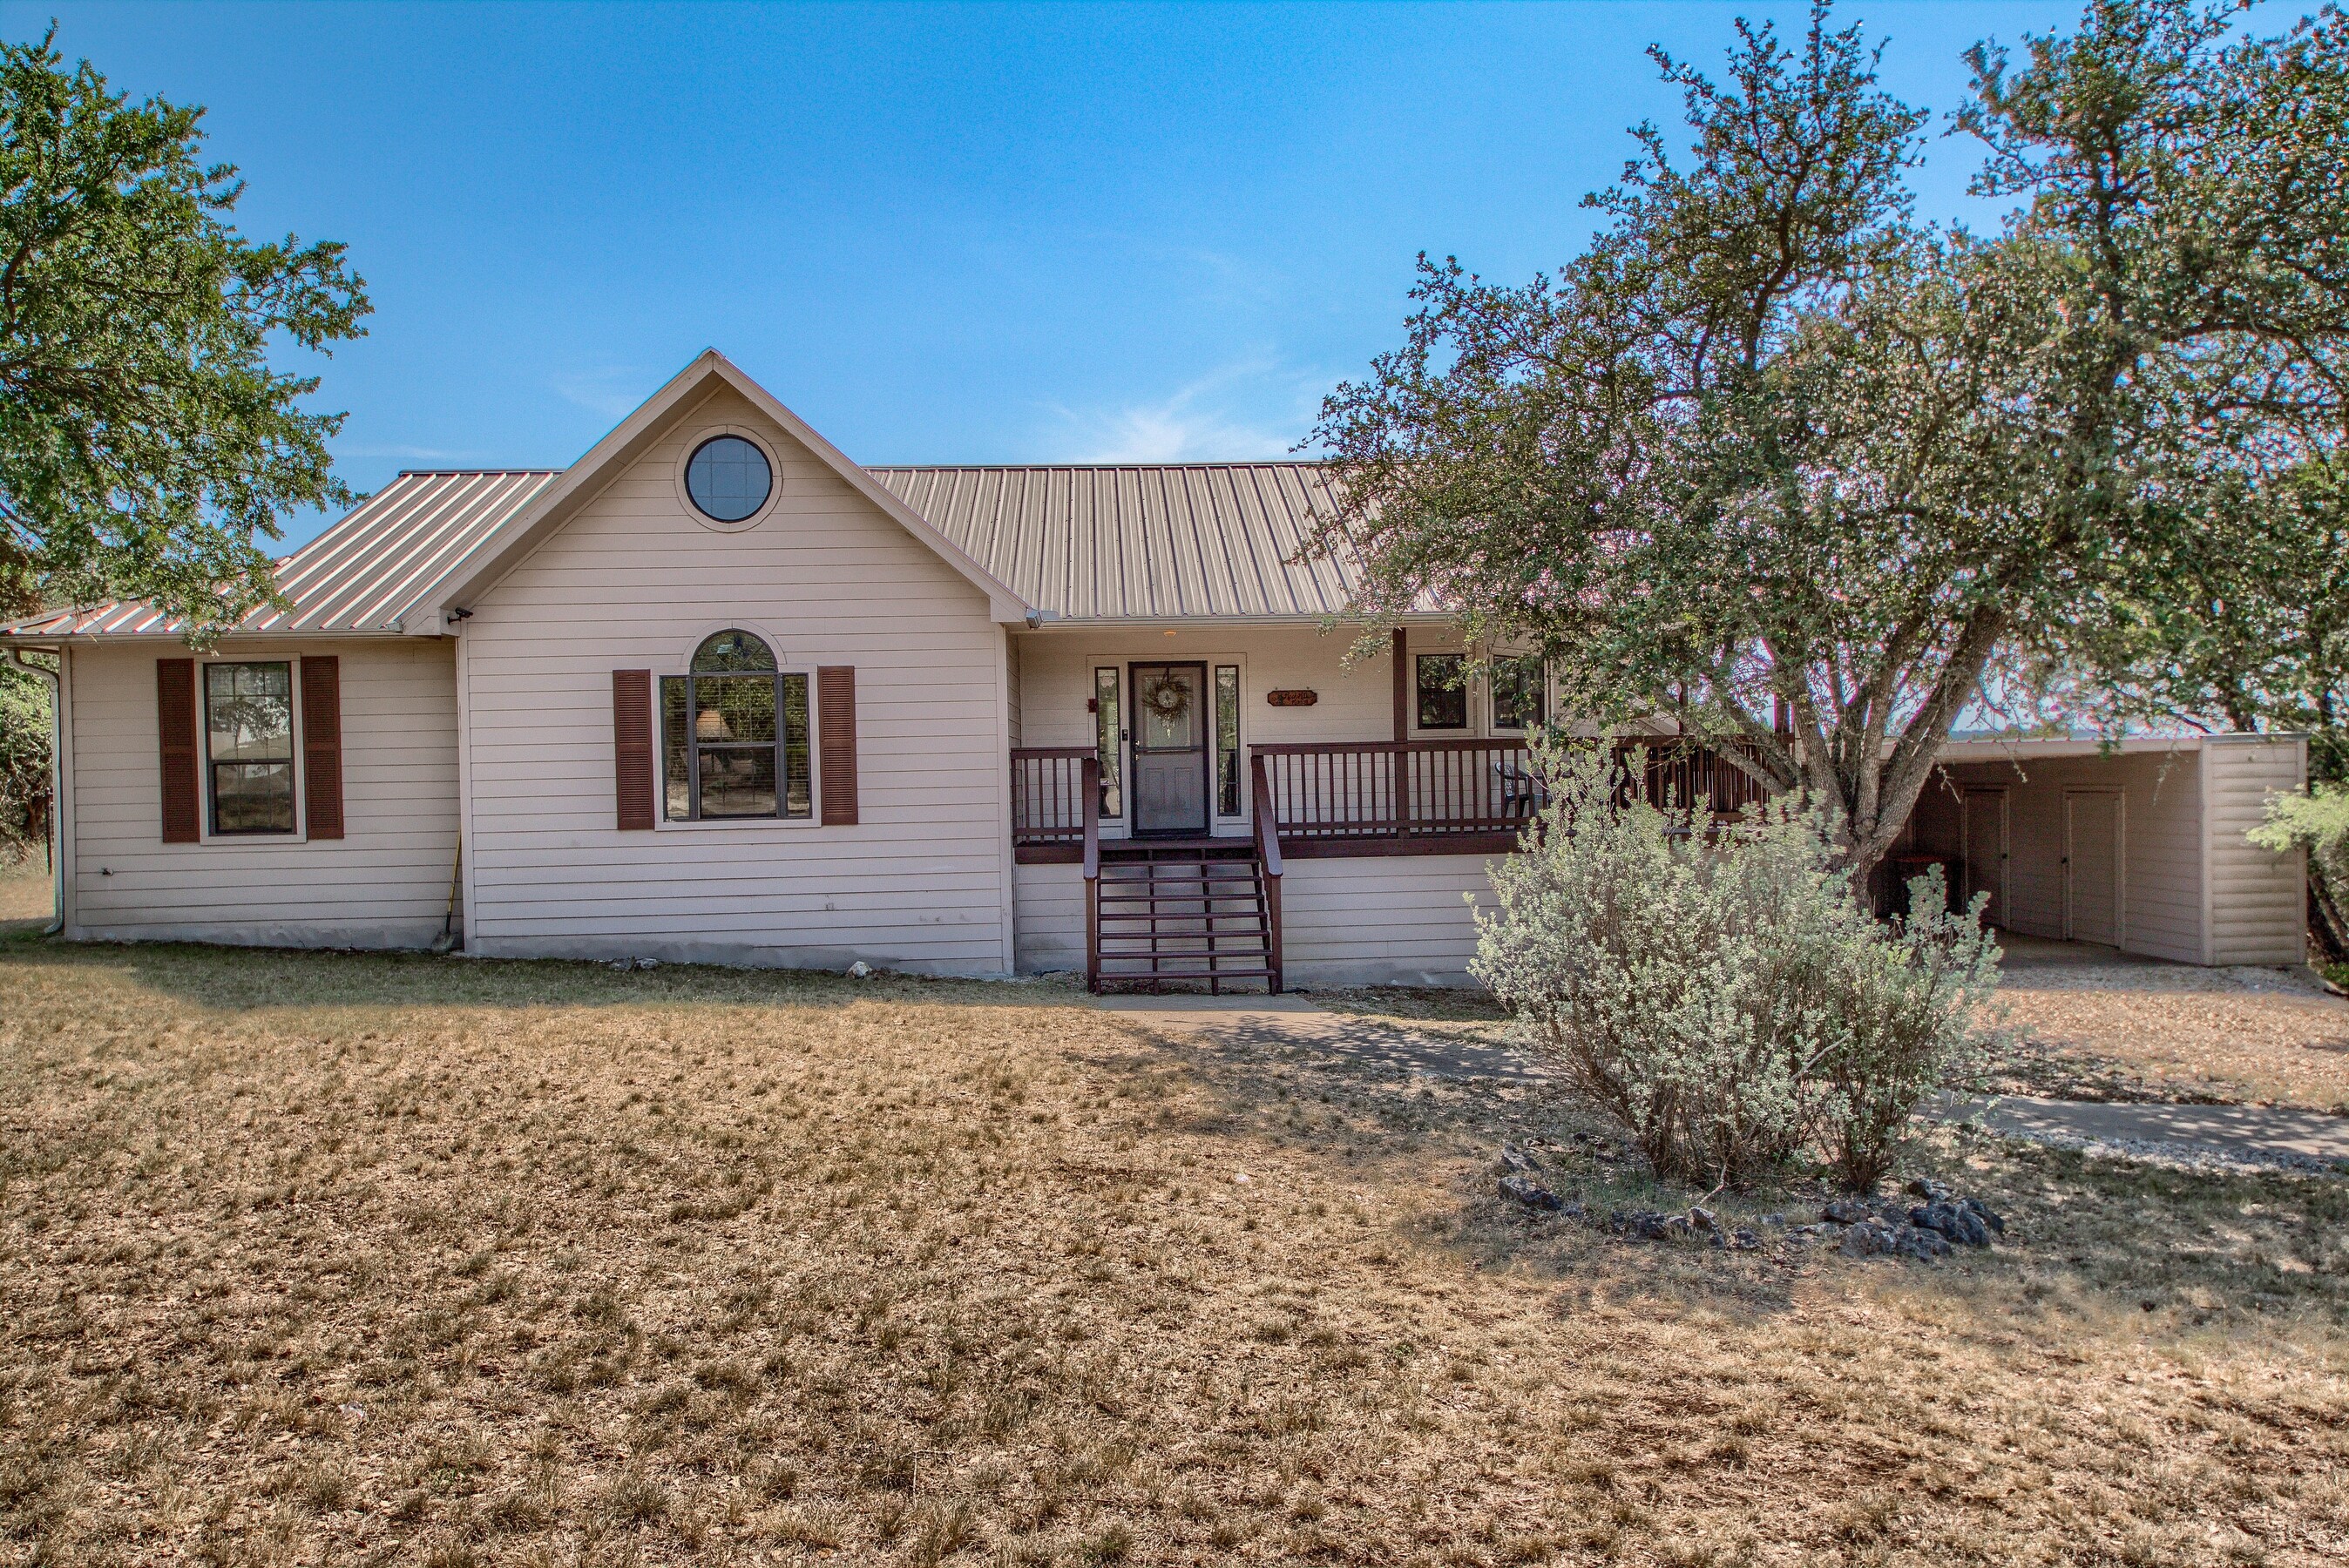 Property Image 2 - The Rocker Dilly Ranch SR 1049